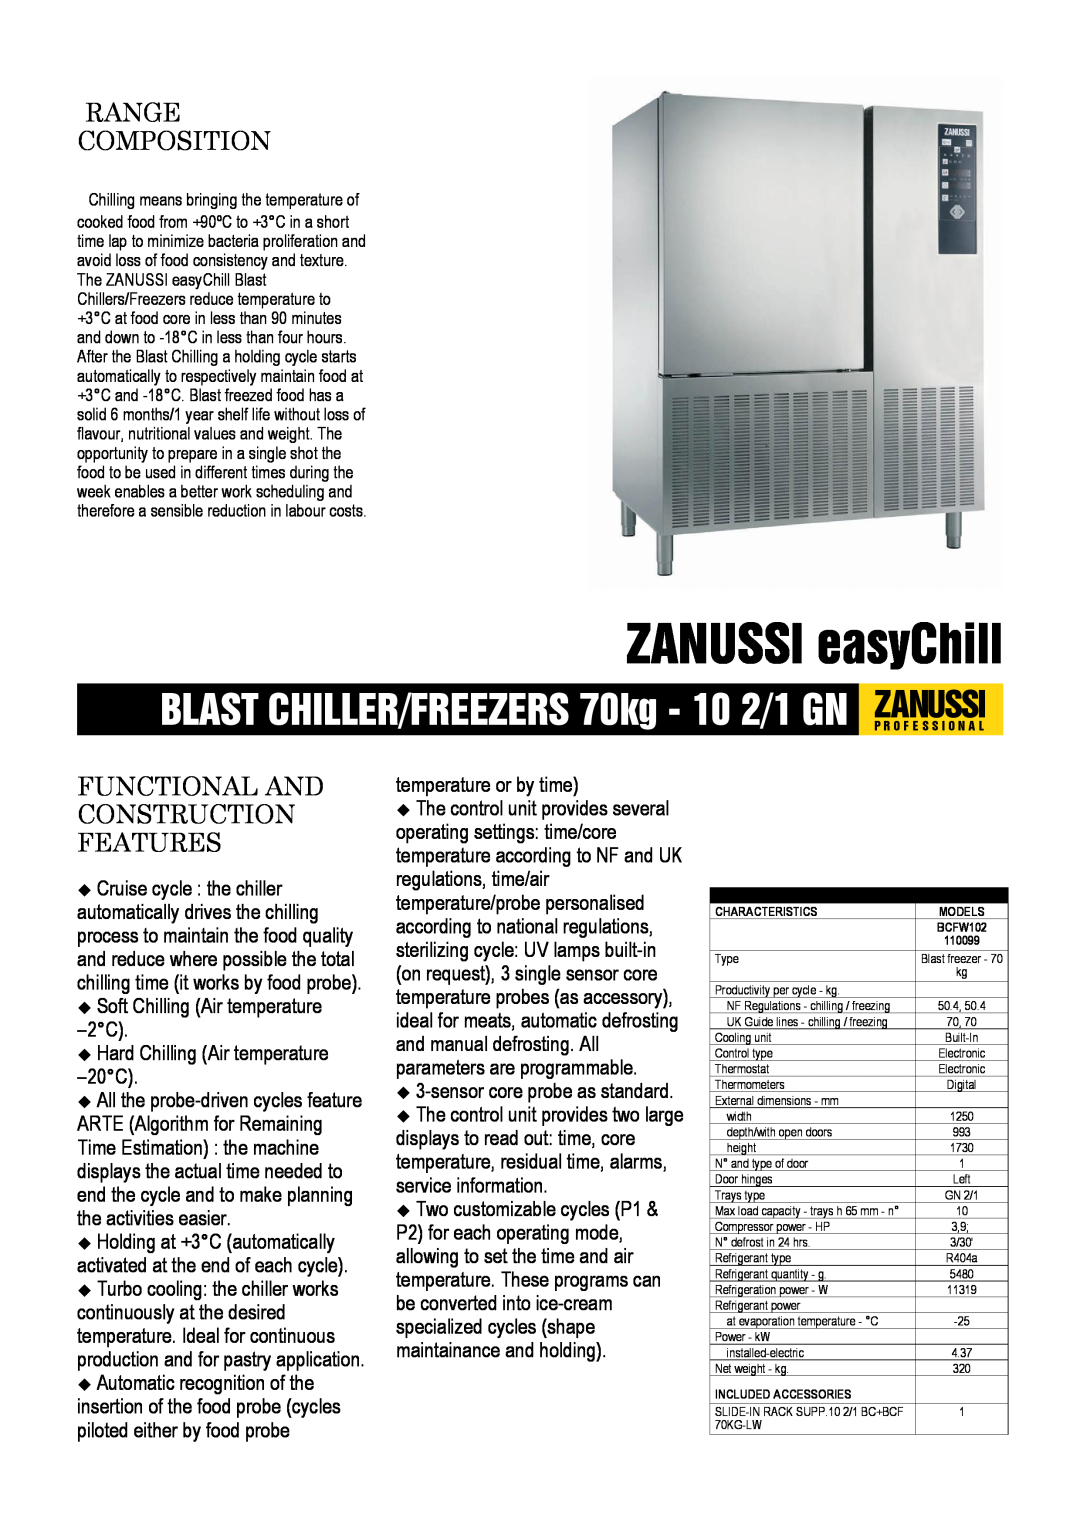 Electrolux BCFW102 dimensions ZANUSSI easyChill, Range Composition, Functional And Construction Features 